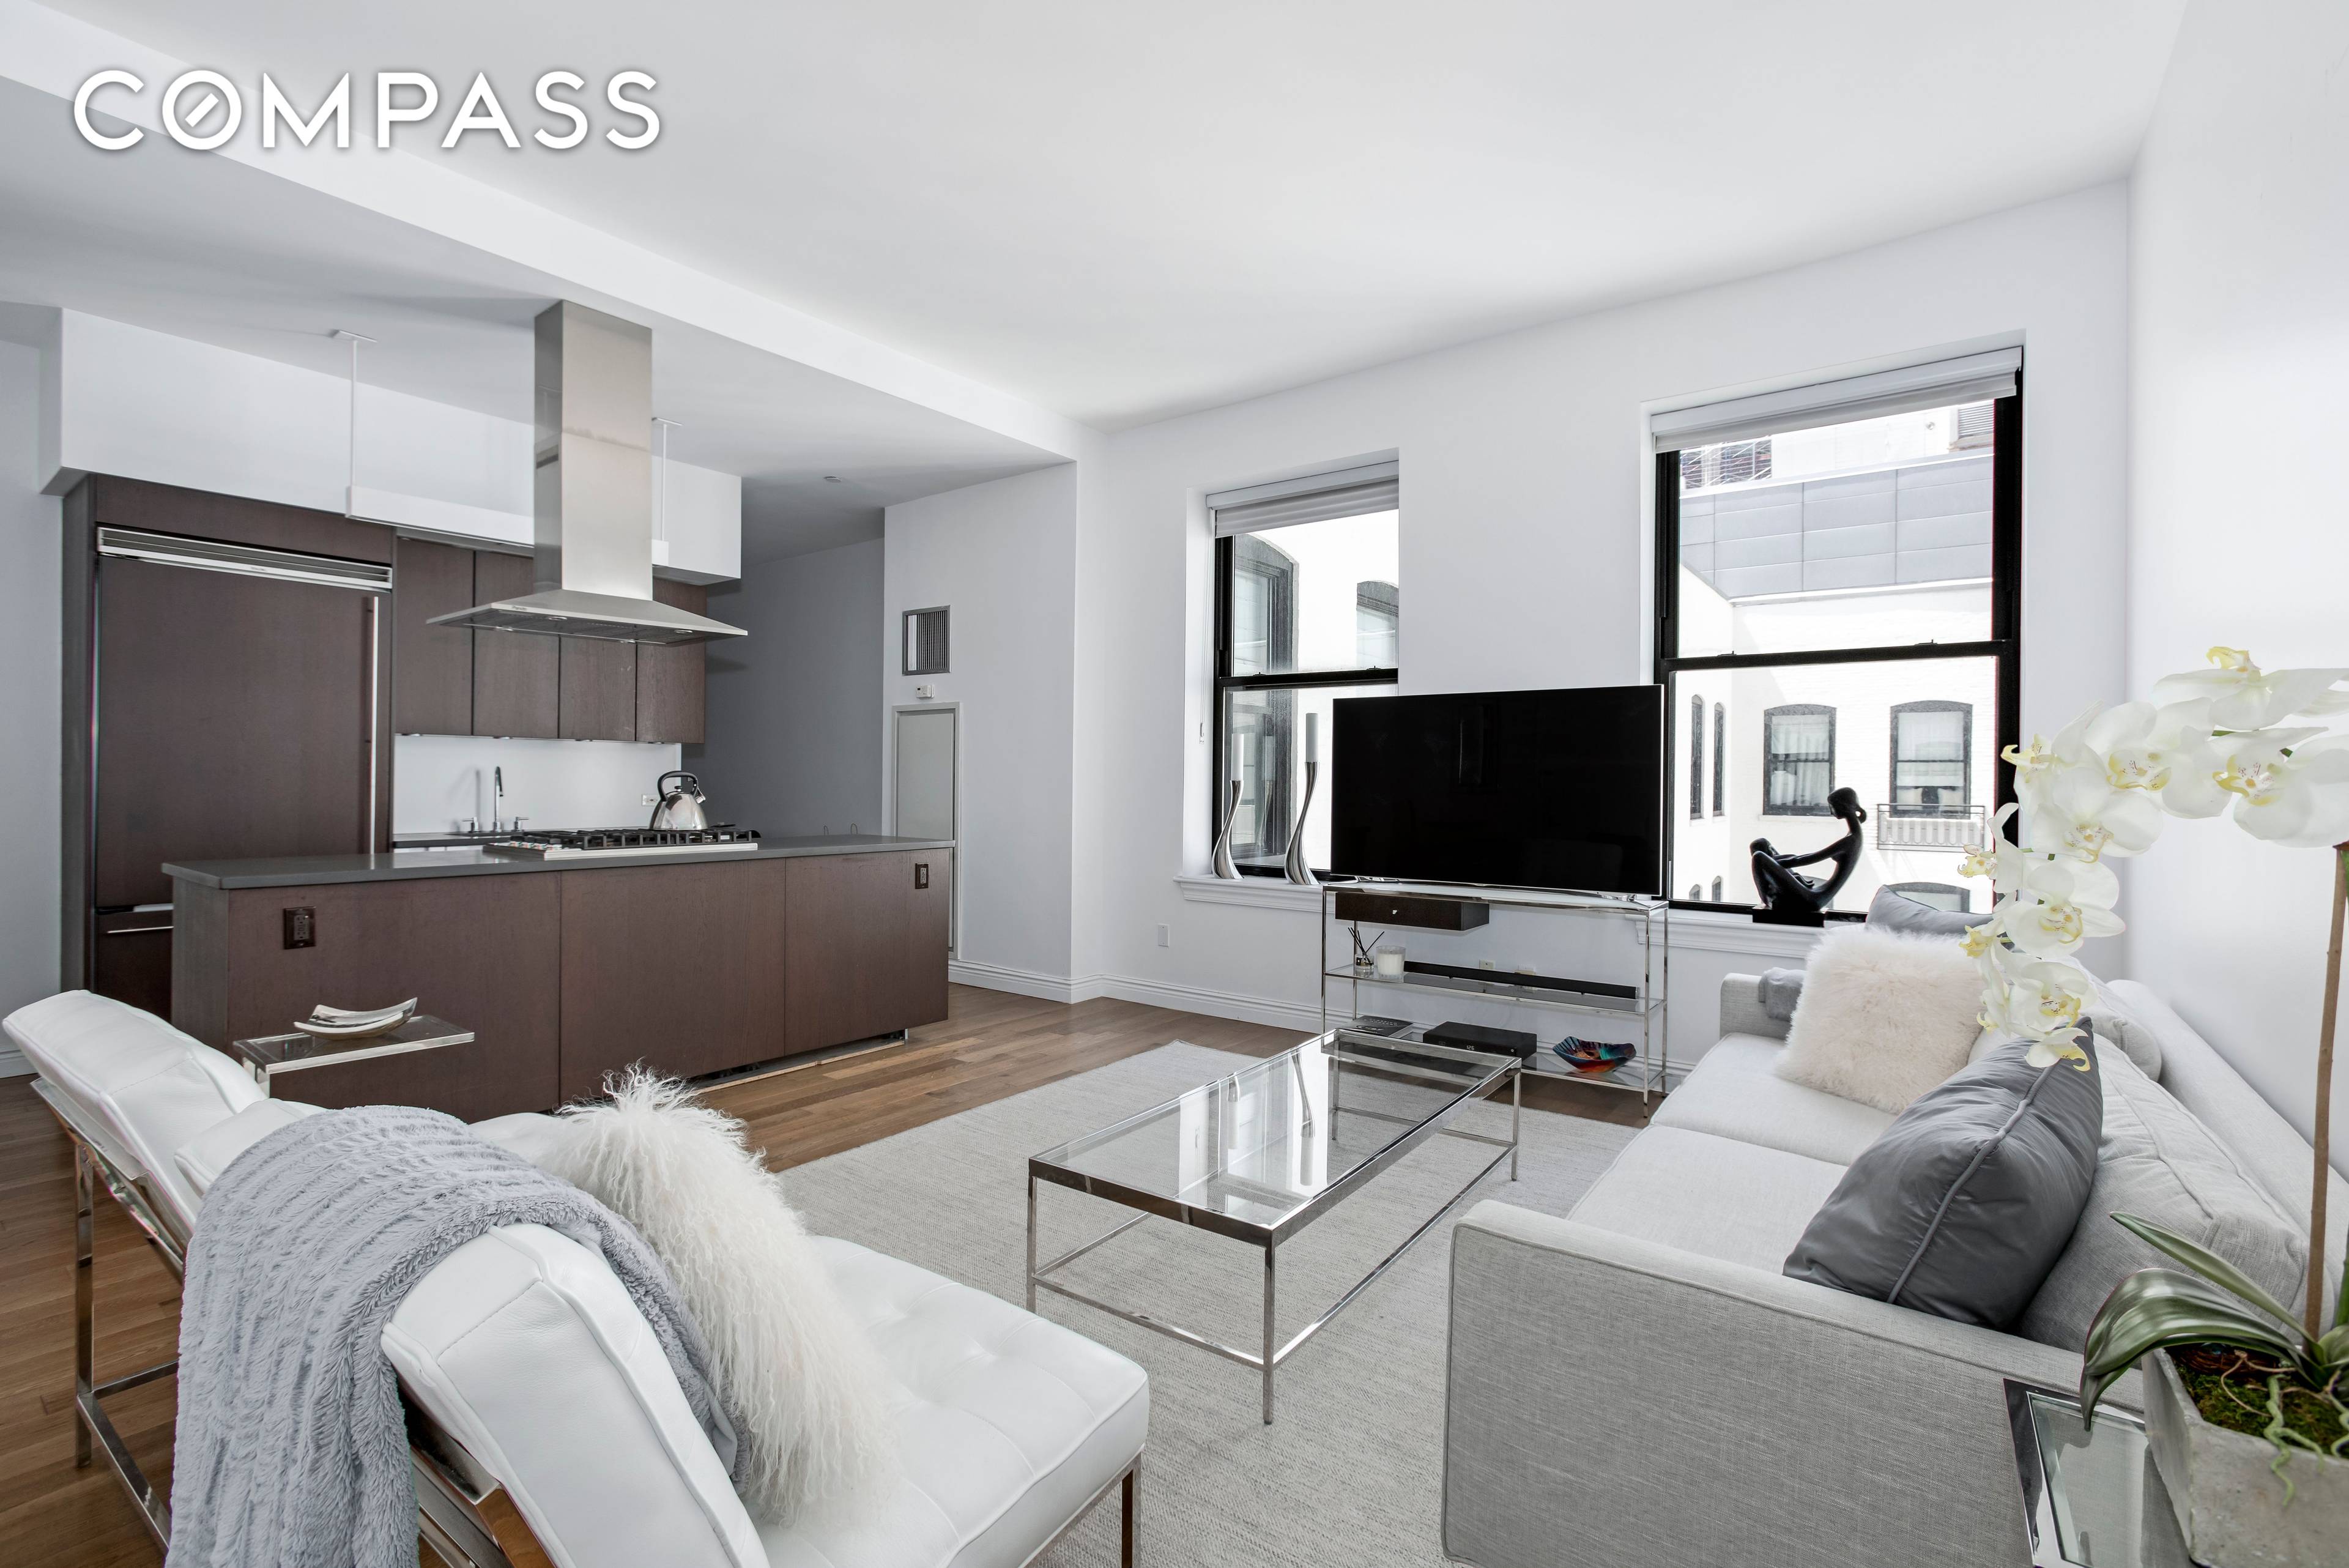 This V line Penthouse unit is one of the most coveted one bedroom layouts at the Grand Madison, now available for the first time since 2013.